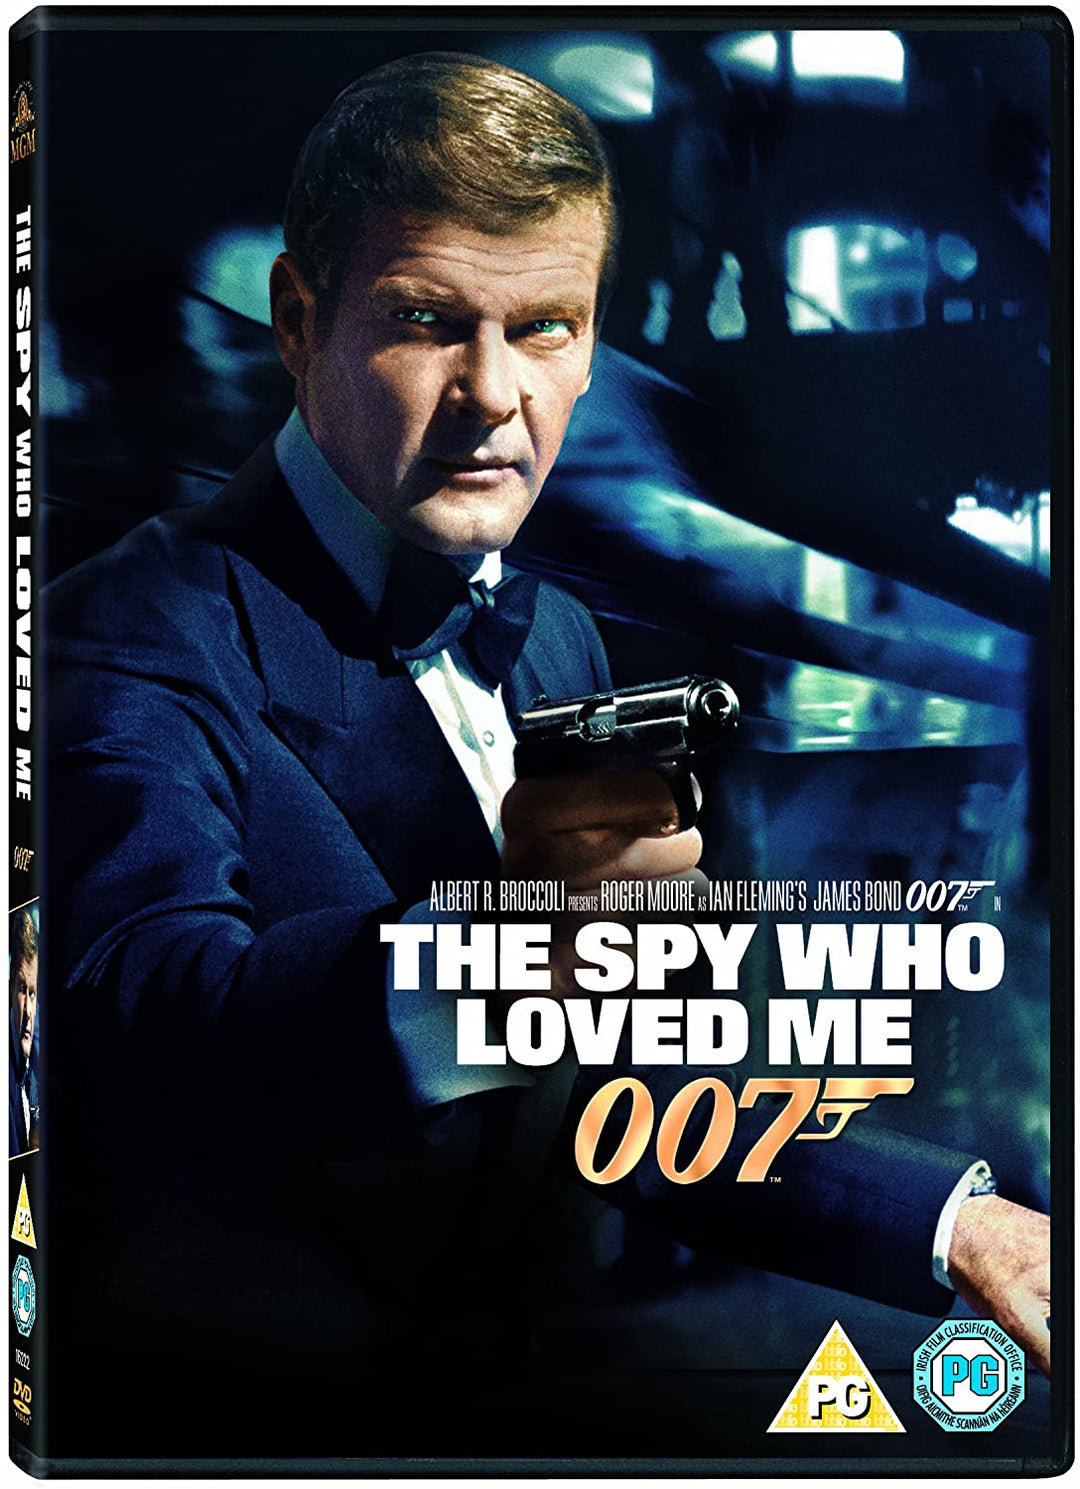 The Spy Who Loved Me [1977] - Action/Spy [DVD]